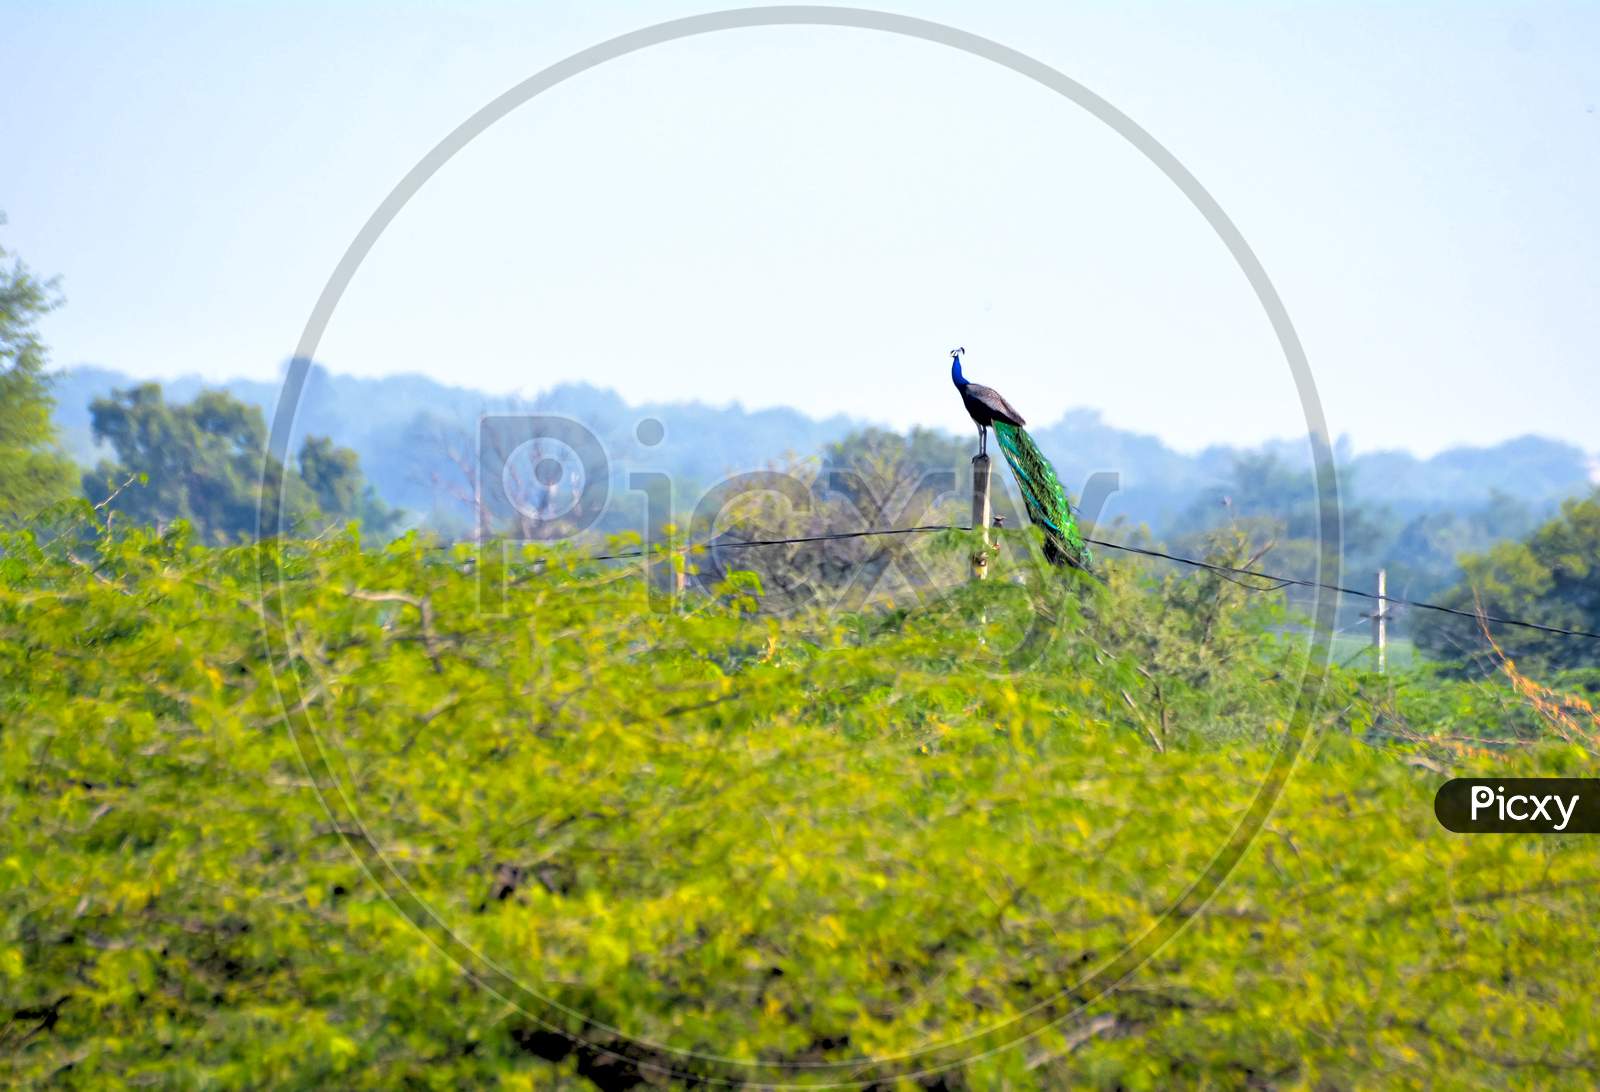 Indian Peafowl Or Peacock Sitting On A Top Of Pole